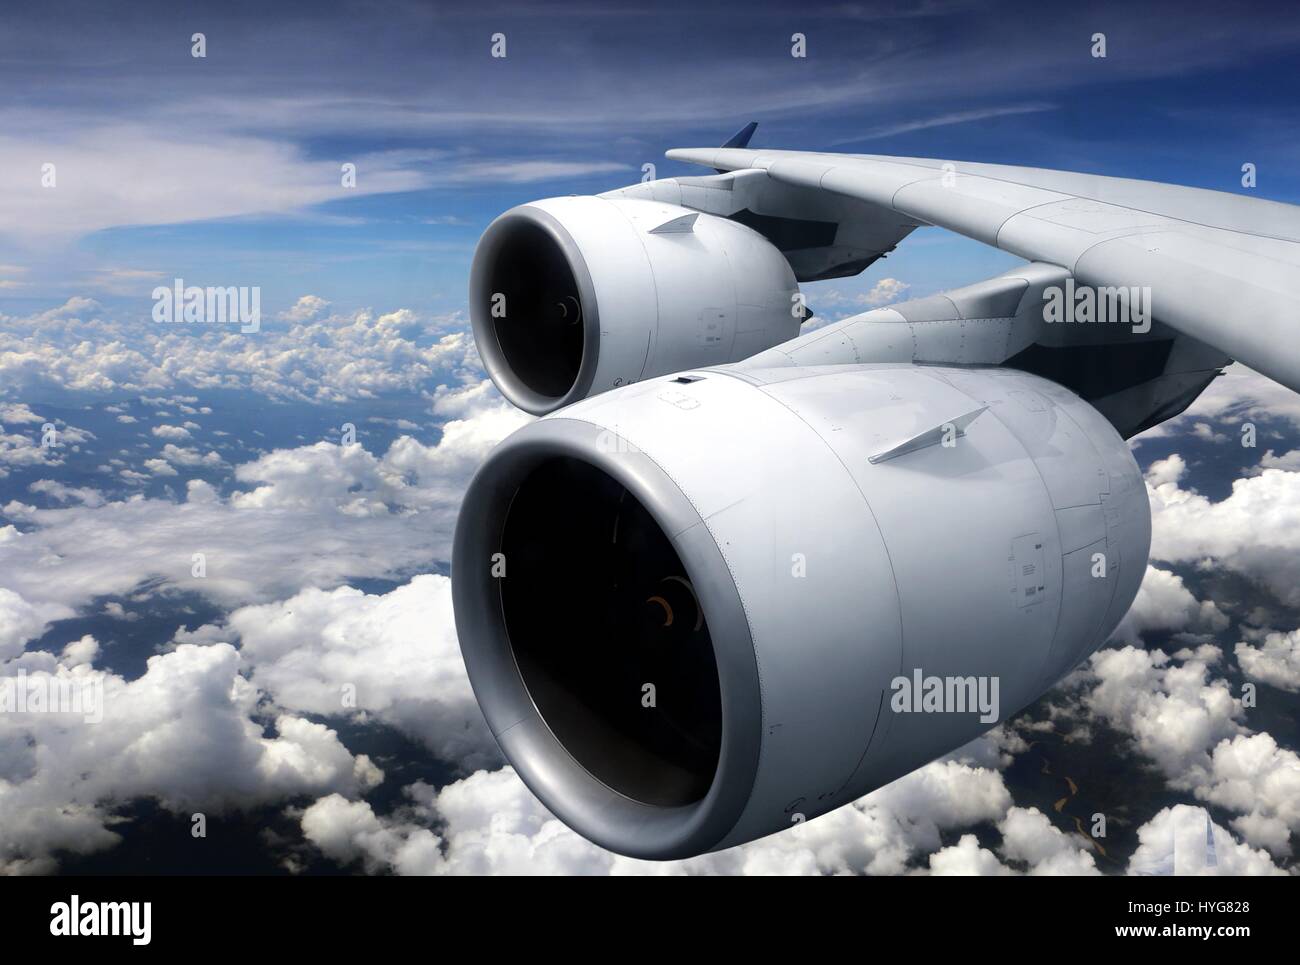 Airplane turbine engine from window view with cloudy sky Stock Photo